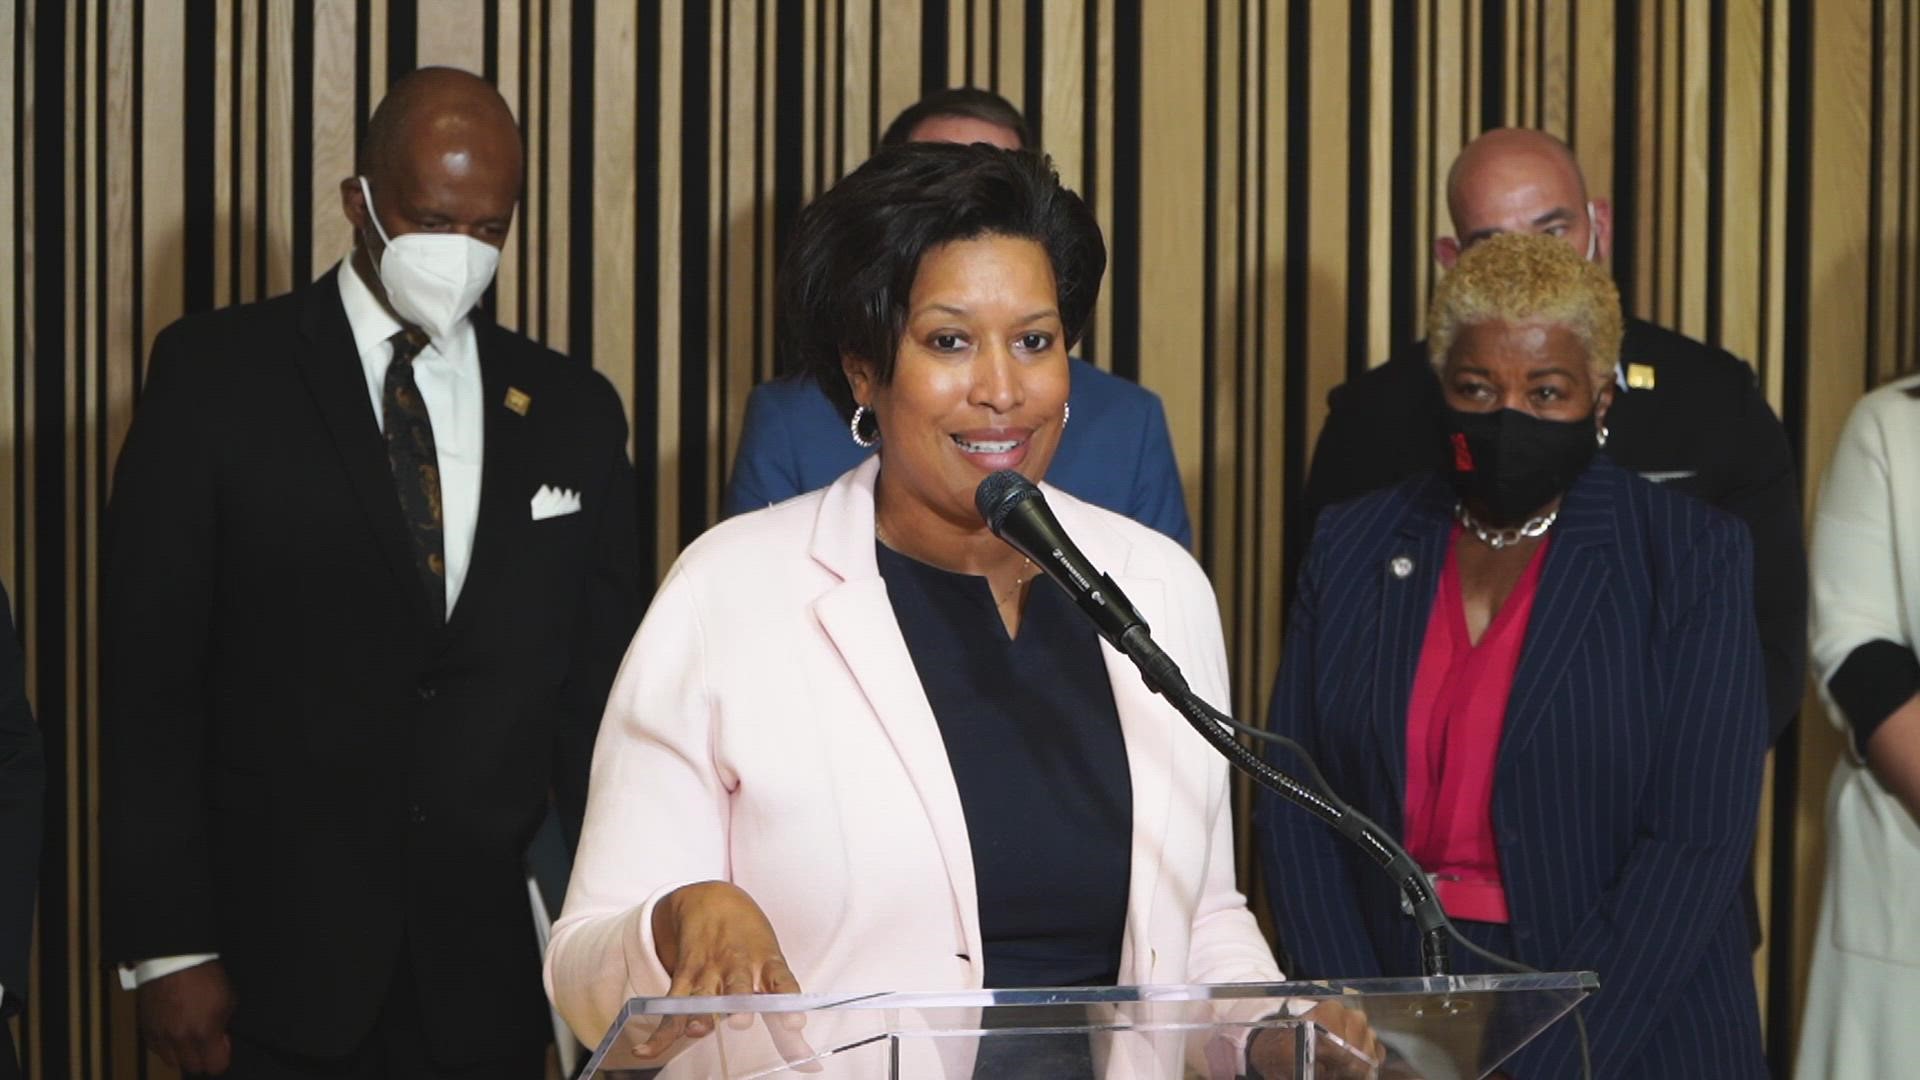 Muriel Bowser's FY2023 budget proposal could be the nail in the coffin for an already-fading dream of the Washington Commanders returning to play in the District.